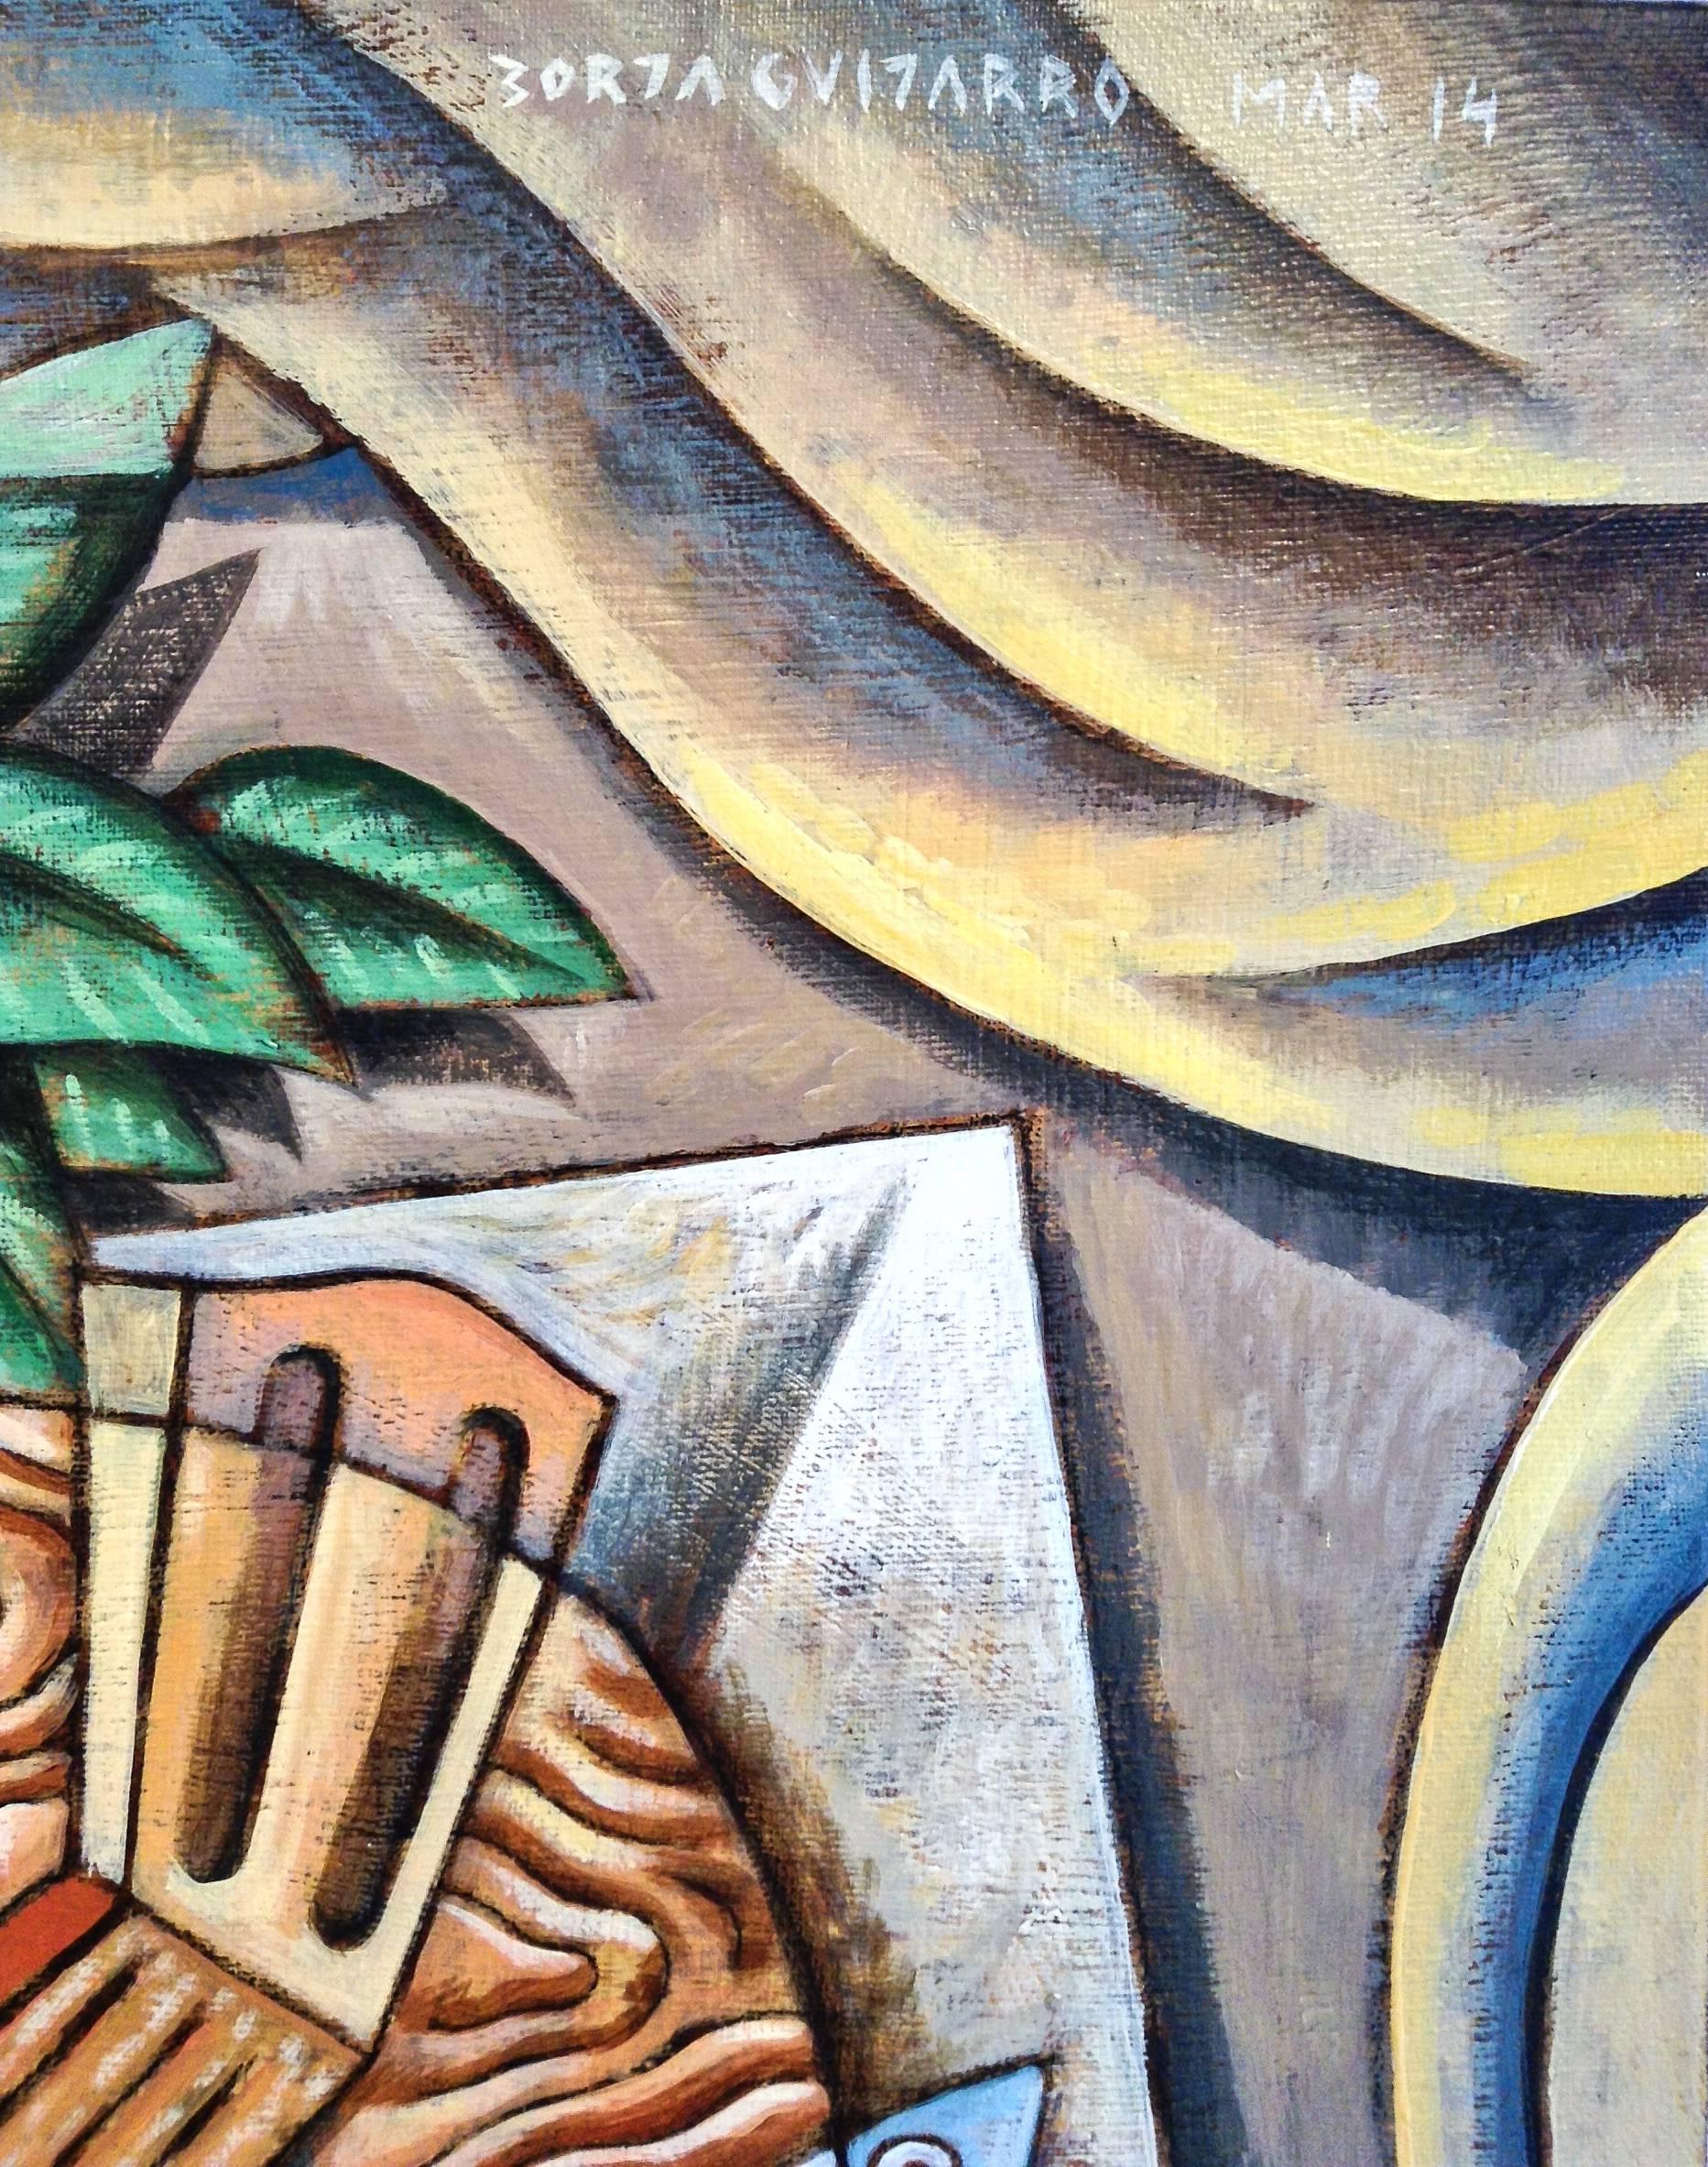 The Feast by Sea abstract landscape oil painting - Cubist Painting by Borja Guijarro